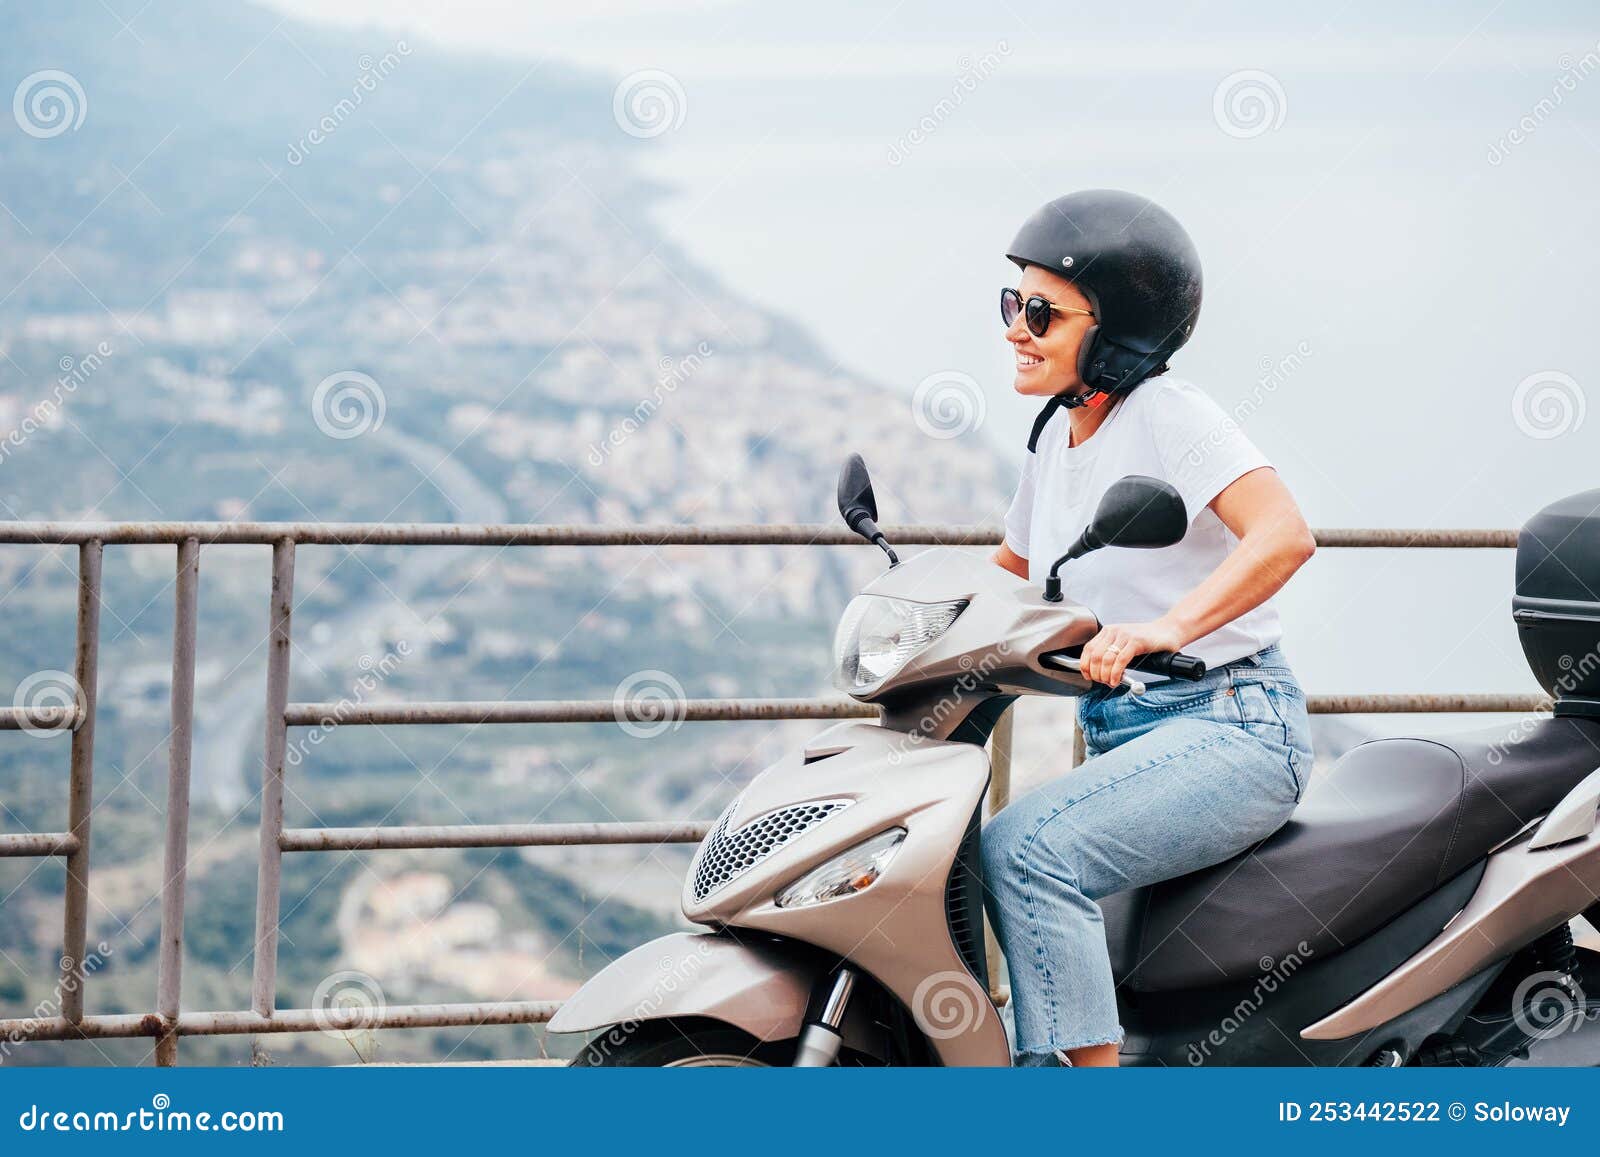 middle-age woman in helmet and sunglasses on motor scooter on the sicilian old town streets in the forza d`agro with sant`alessi